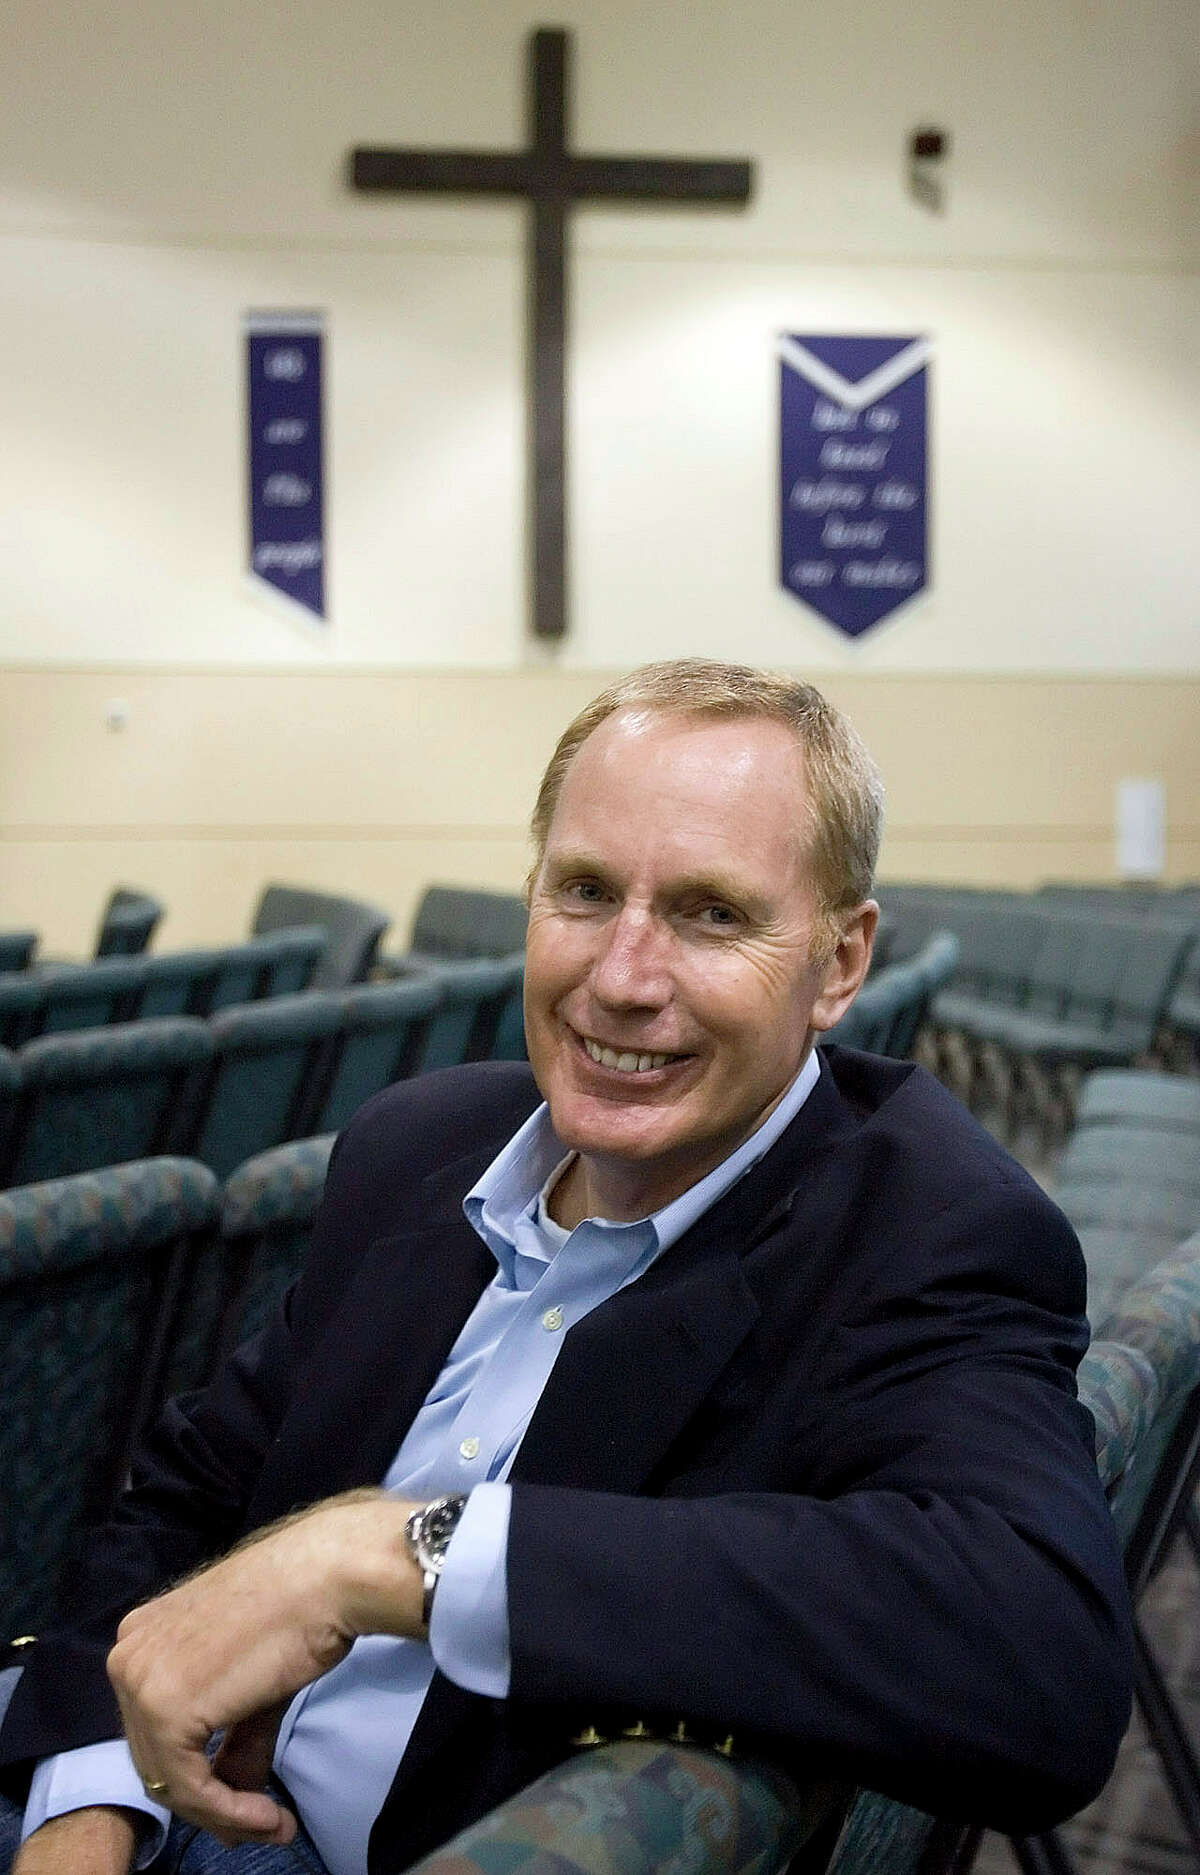 FILE - In this March 13, 2007, file photo, Oak Hills Church senior pastor Max Lucado poses in the Oak Hills Church worship center in San Antonio. As Republican presidential candidate Donald Trump?’s ascendancy forces the GOP establishment to confront how it lost touch with so many conservative voters, top evangelicals are facing their own dark night, wondering what has drawn so many Christians to a twice-divorced, profane casino magnate with a muddled record on abortion and gay marriage. "We stand against bullying in schools. Shouldn't we do the same in presidential politics?" Lucado wrote recently in Christianity Today, a prominent evangelical magazine. (William Luther/The San Antonio Express-News via AP, File) RUMBO DE SAN ANTONIO OUT; NO SALES; MANDATORY CREDIT